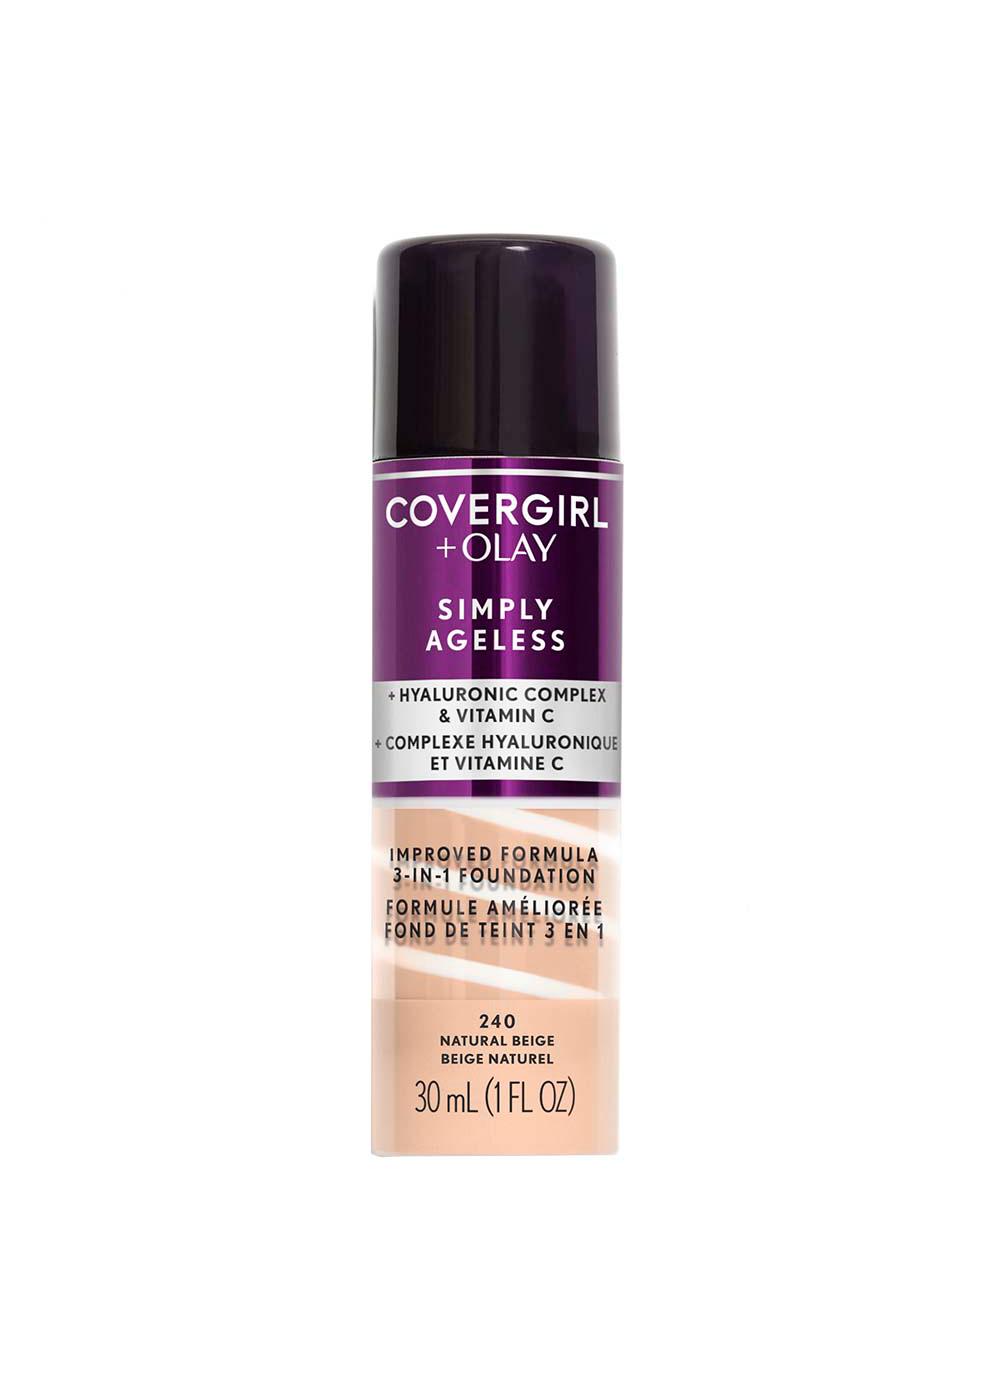 Covergirl Simply Ageless 3-in-1 Liquid Foundation 240 Natural Beige; image 1 of 6